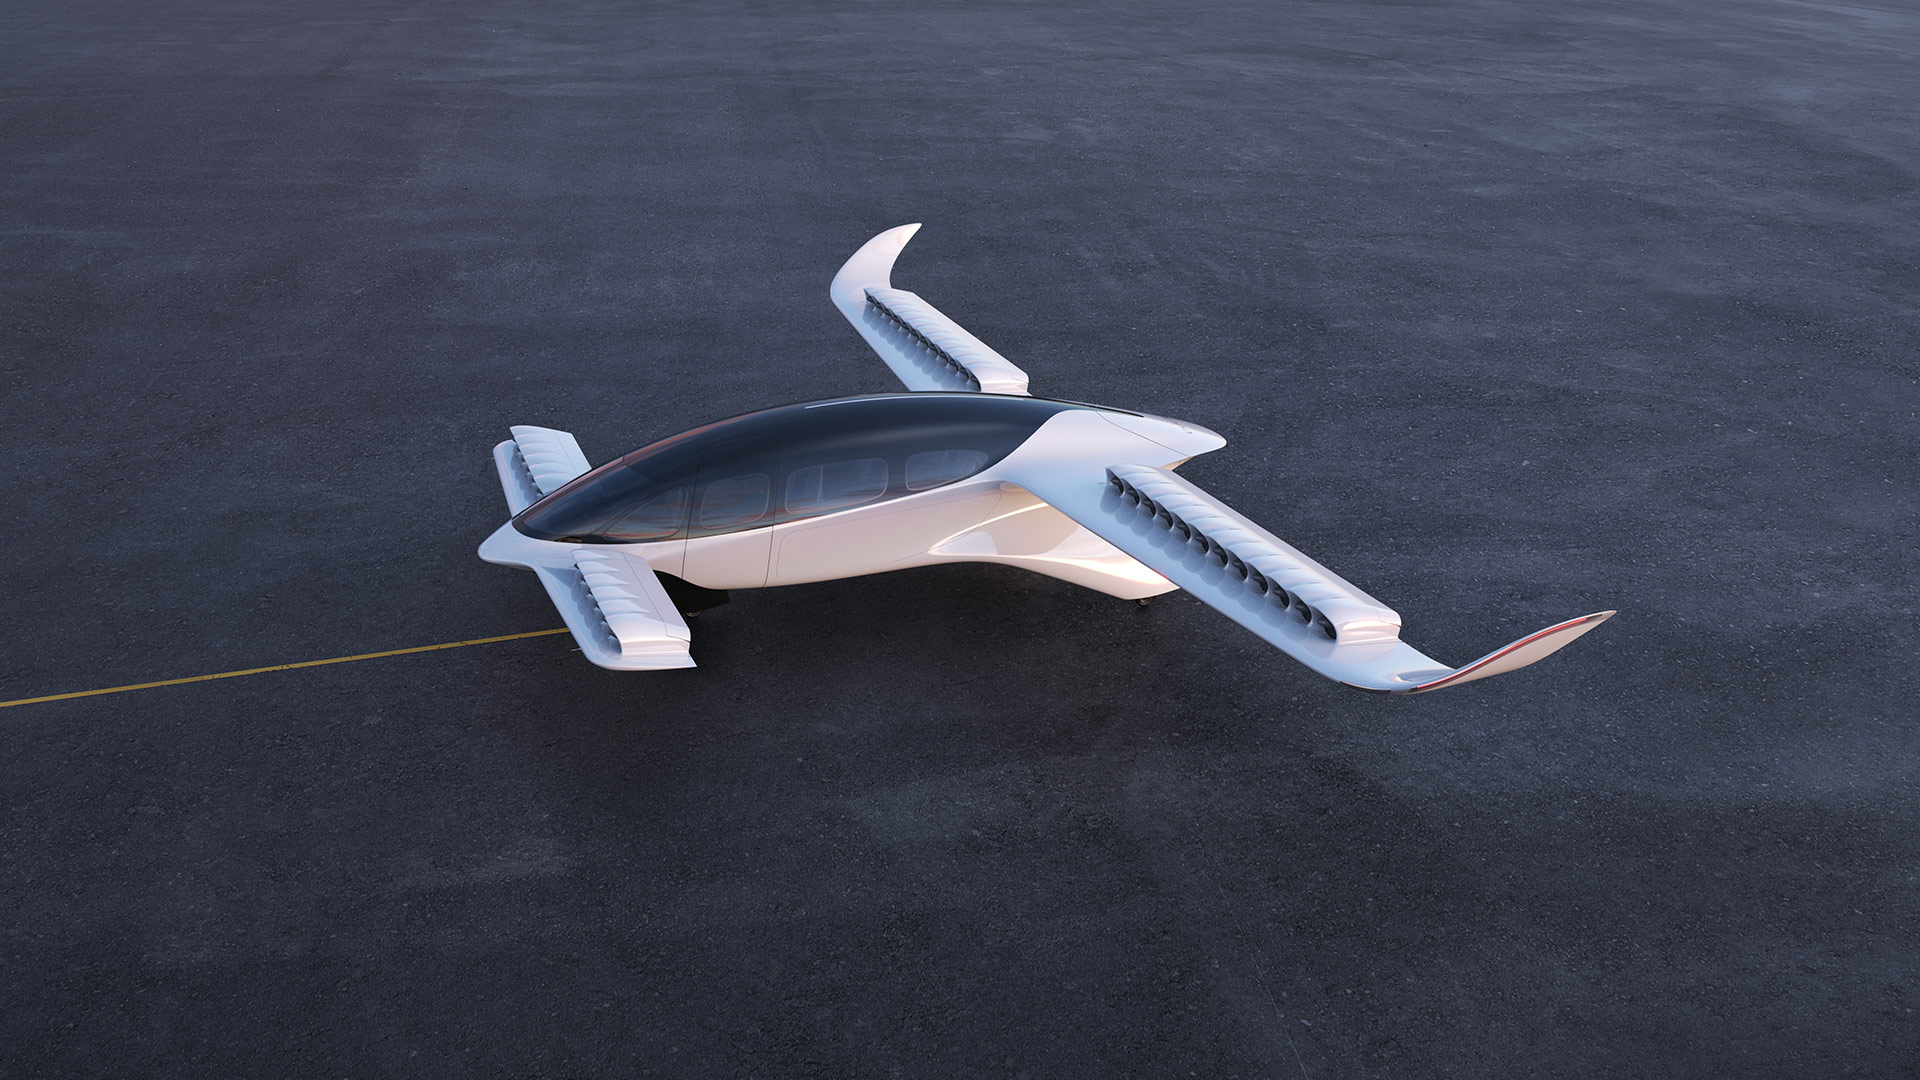 A top view render of the 7 seat Lilium Jet on the tarmac